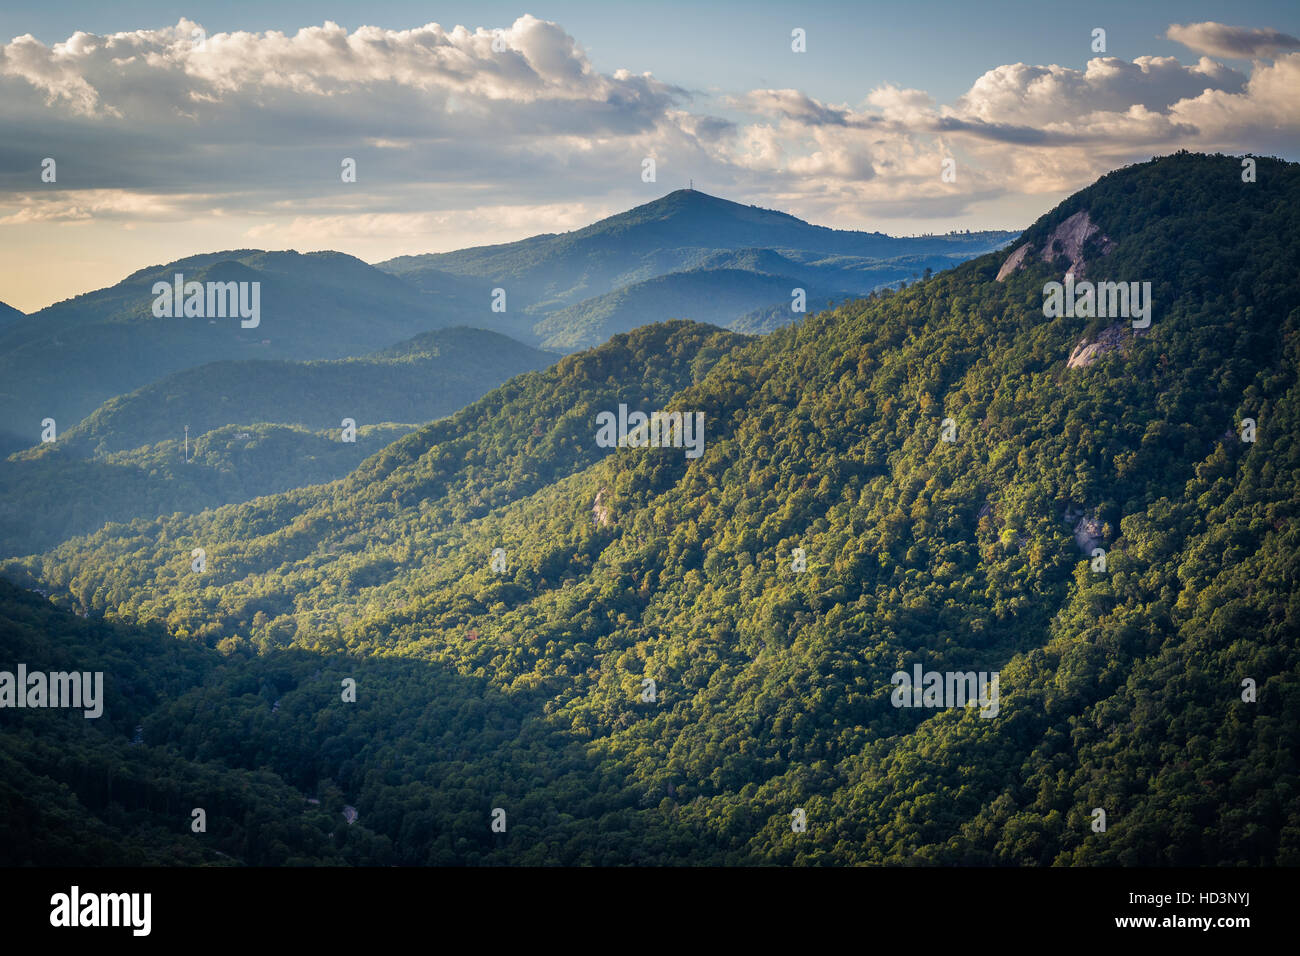 View of mountains from Chimney Rock State Park, North Carolina. Stock Photo